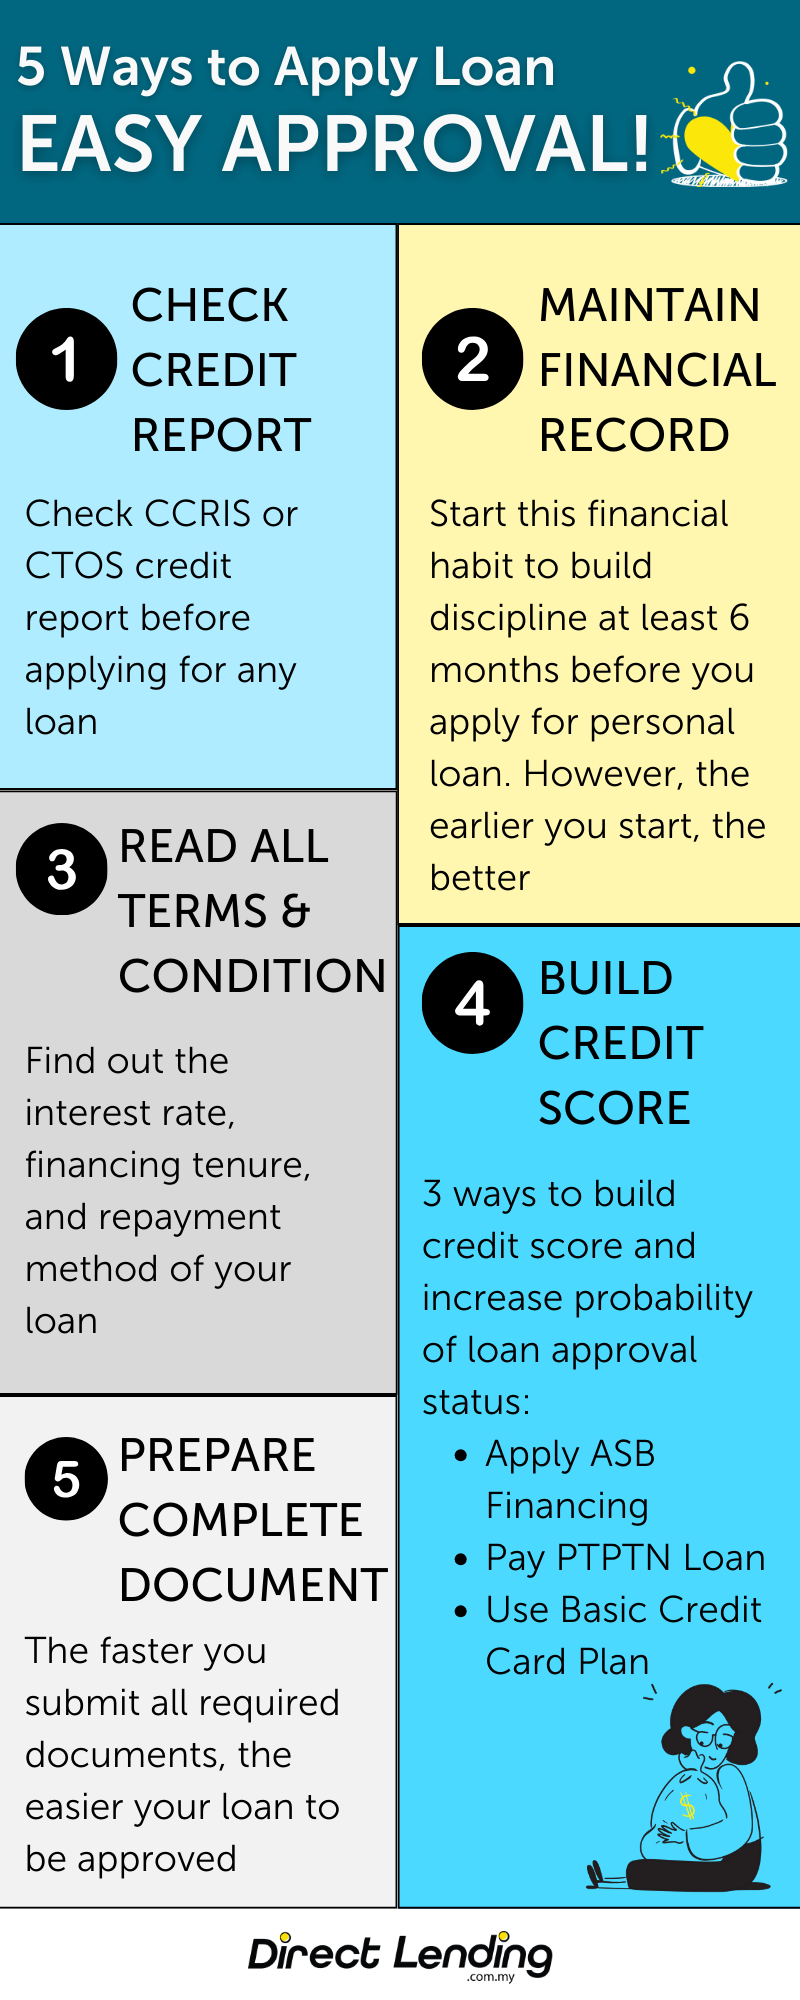 How to apply loan fast and easy approval